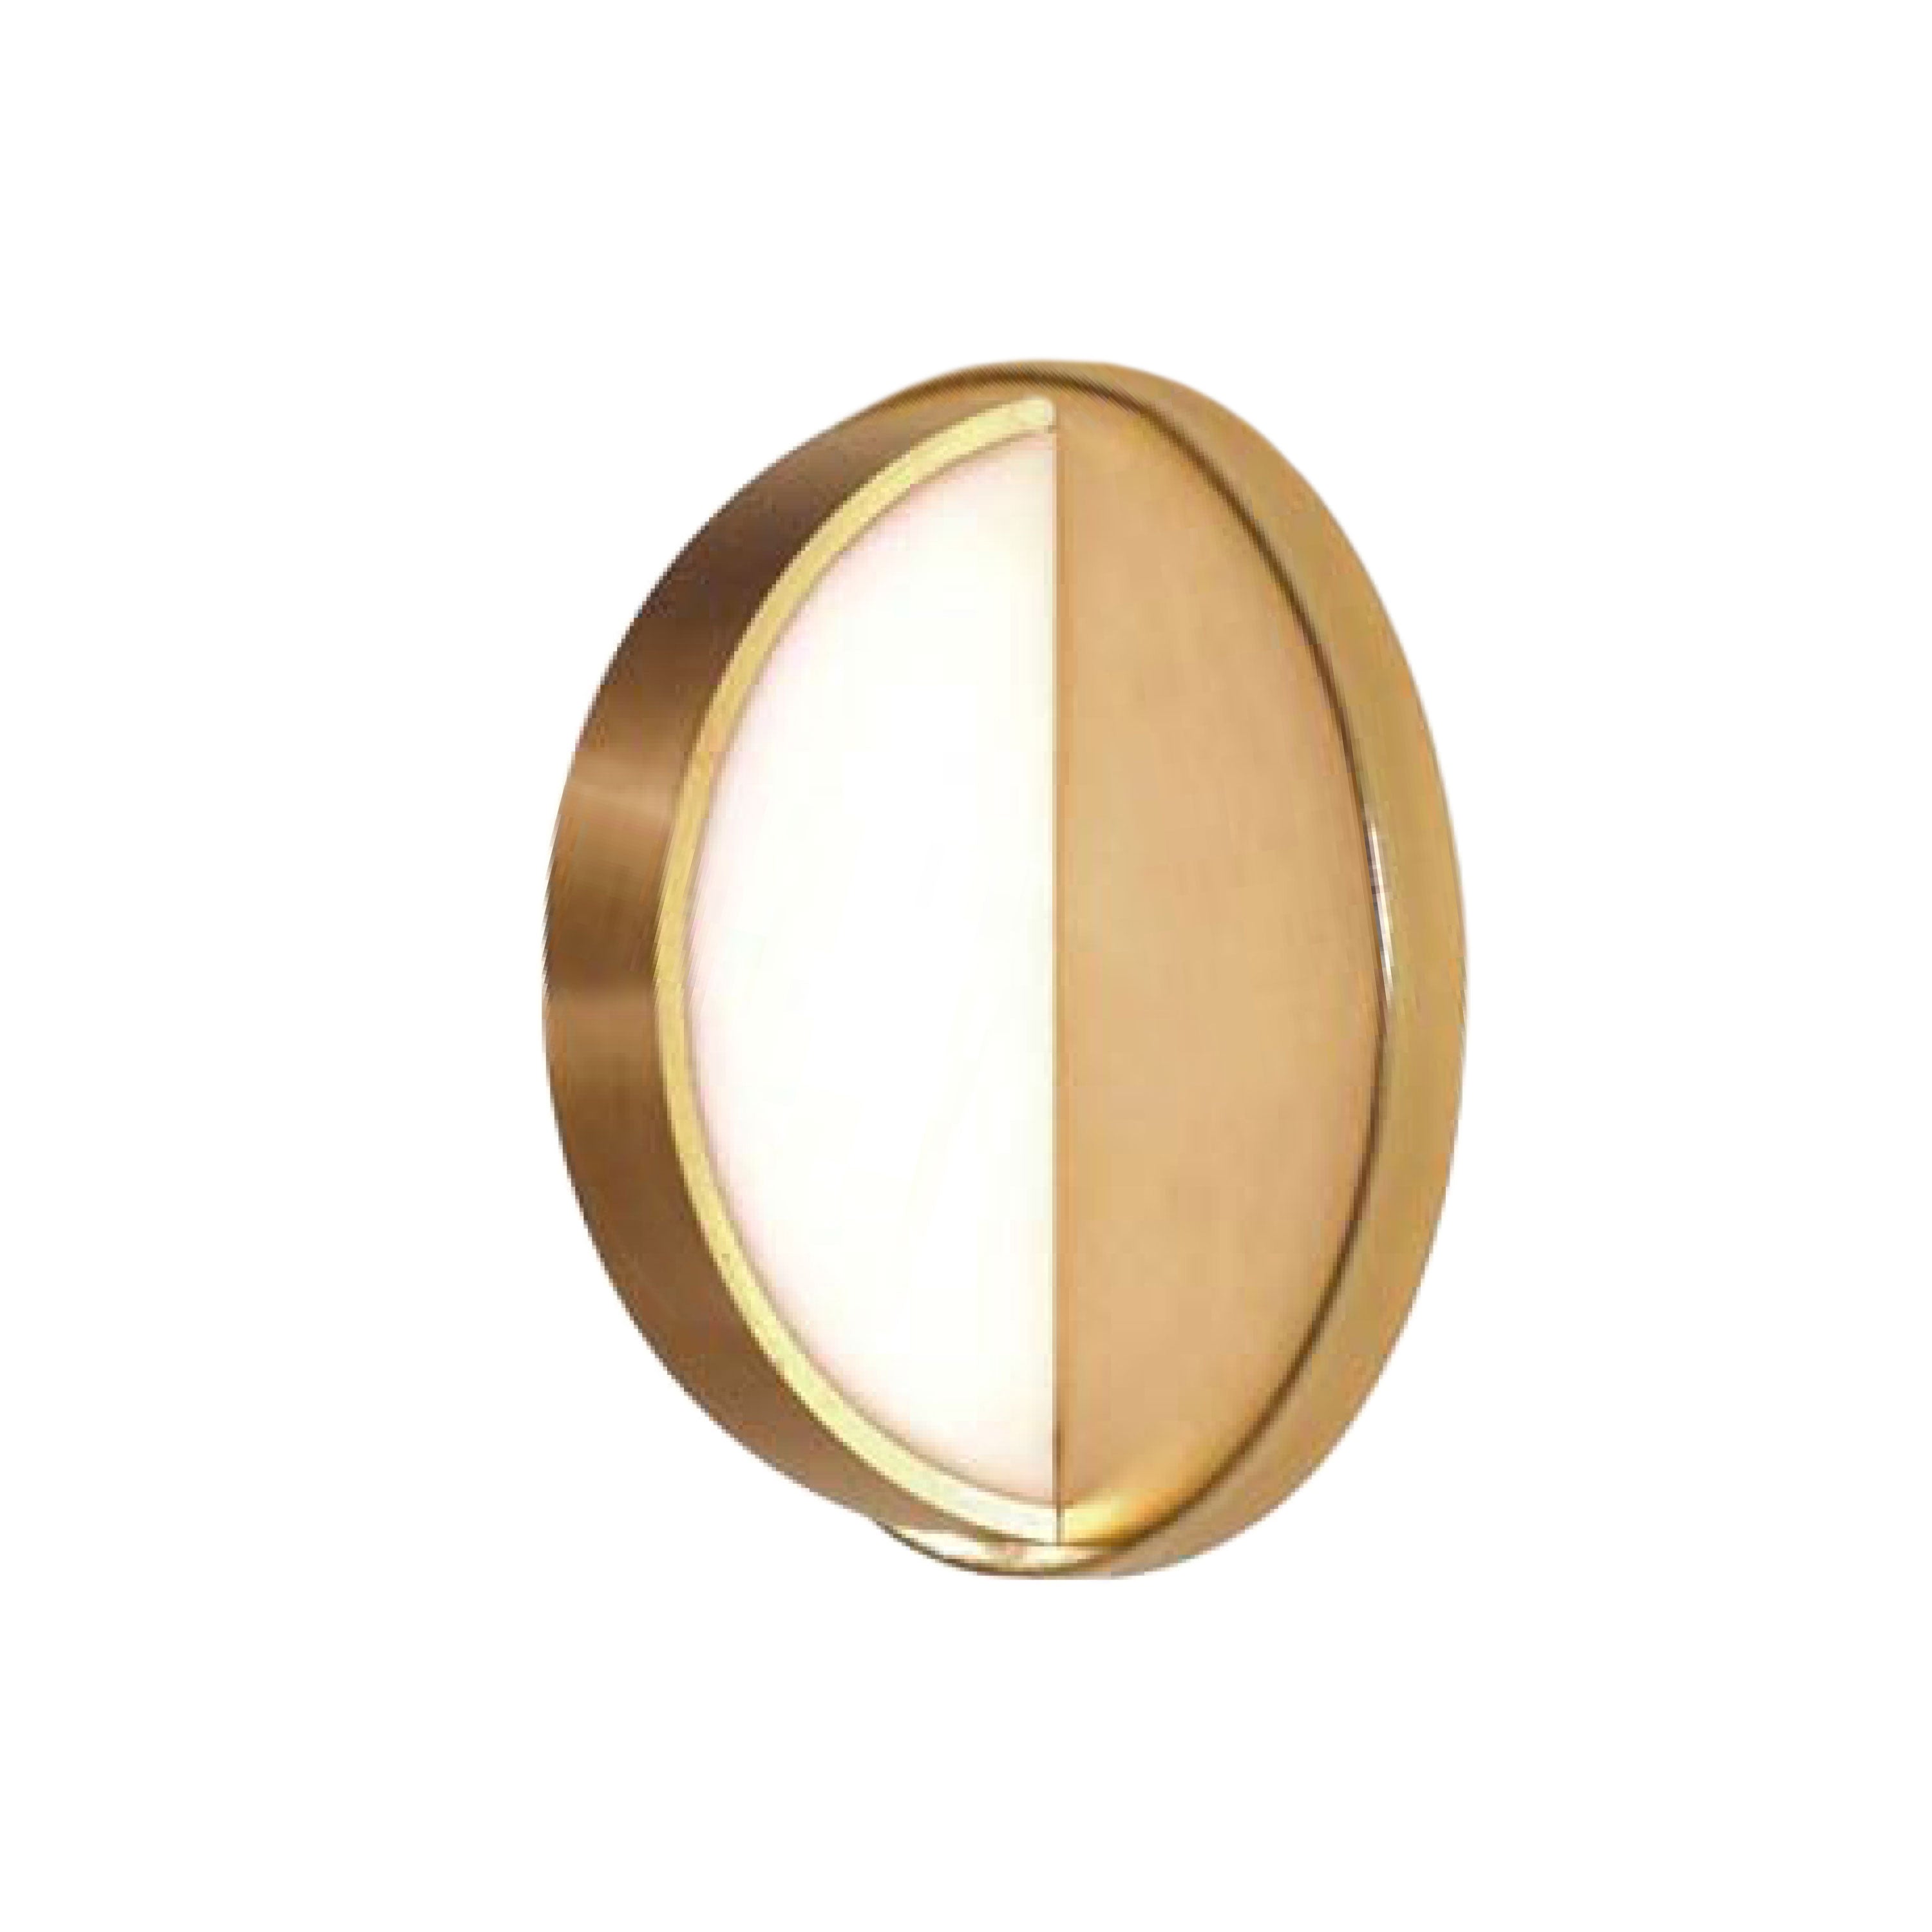 TOPAZ Wall sconce Gold INTEGRATED LED - TOP-55LEDW-AGB | DAINOLITE